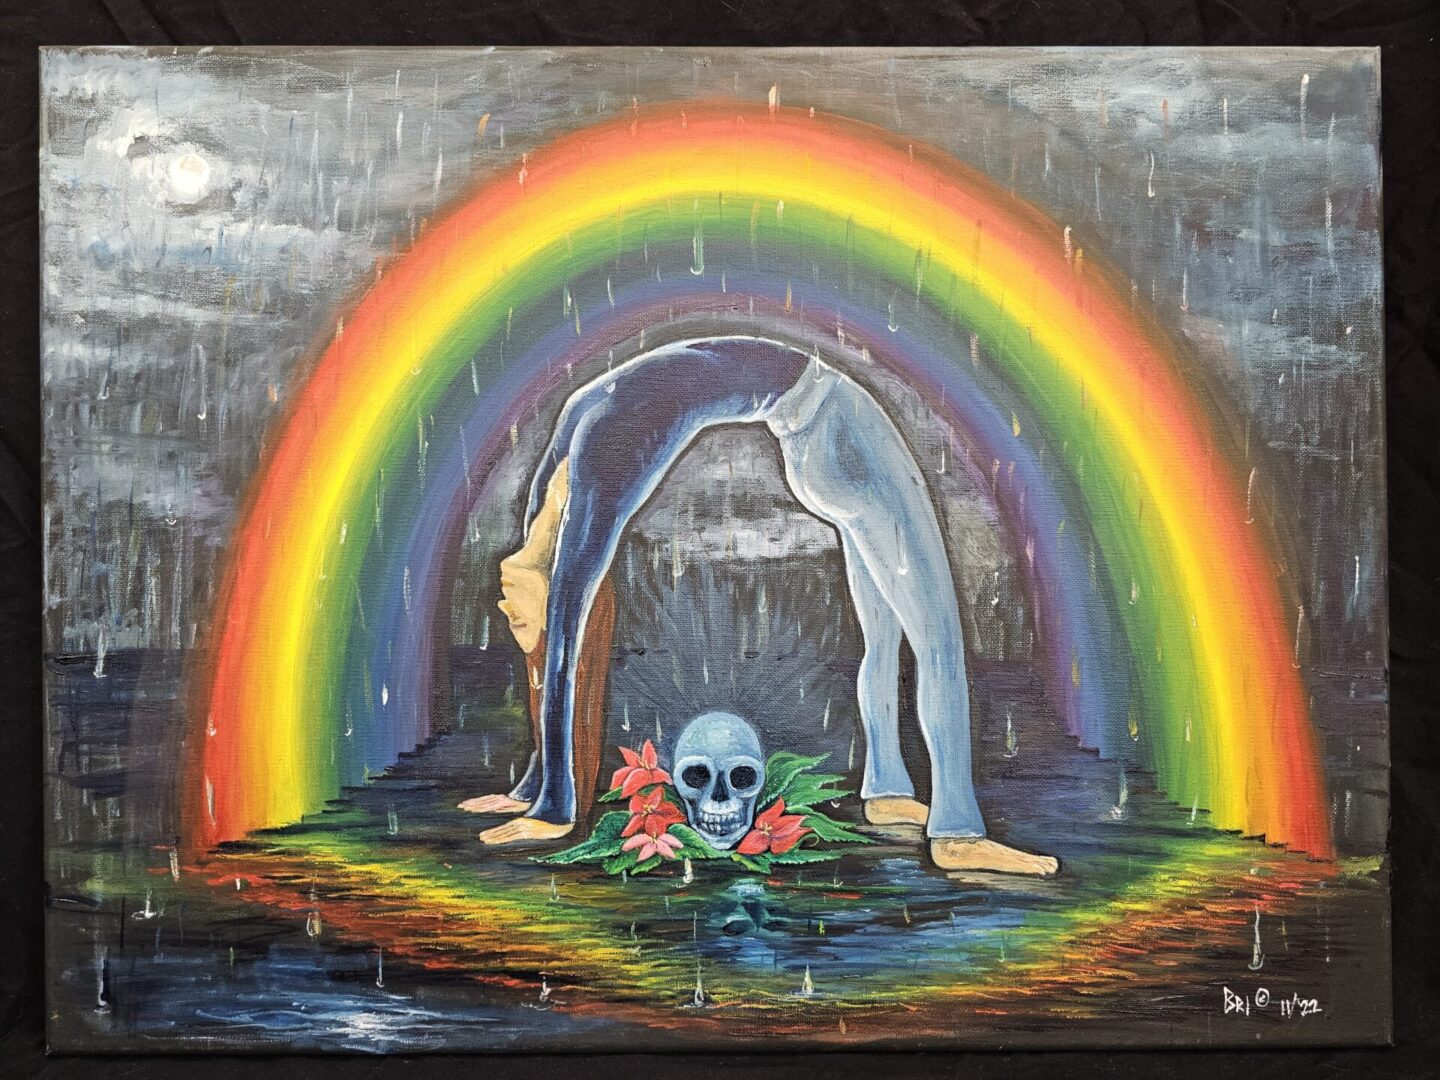 A painting of a rainbow and skull in the water